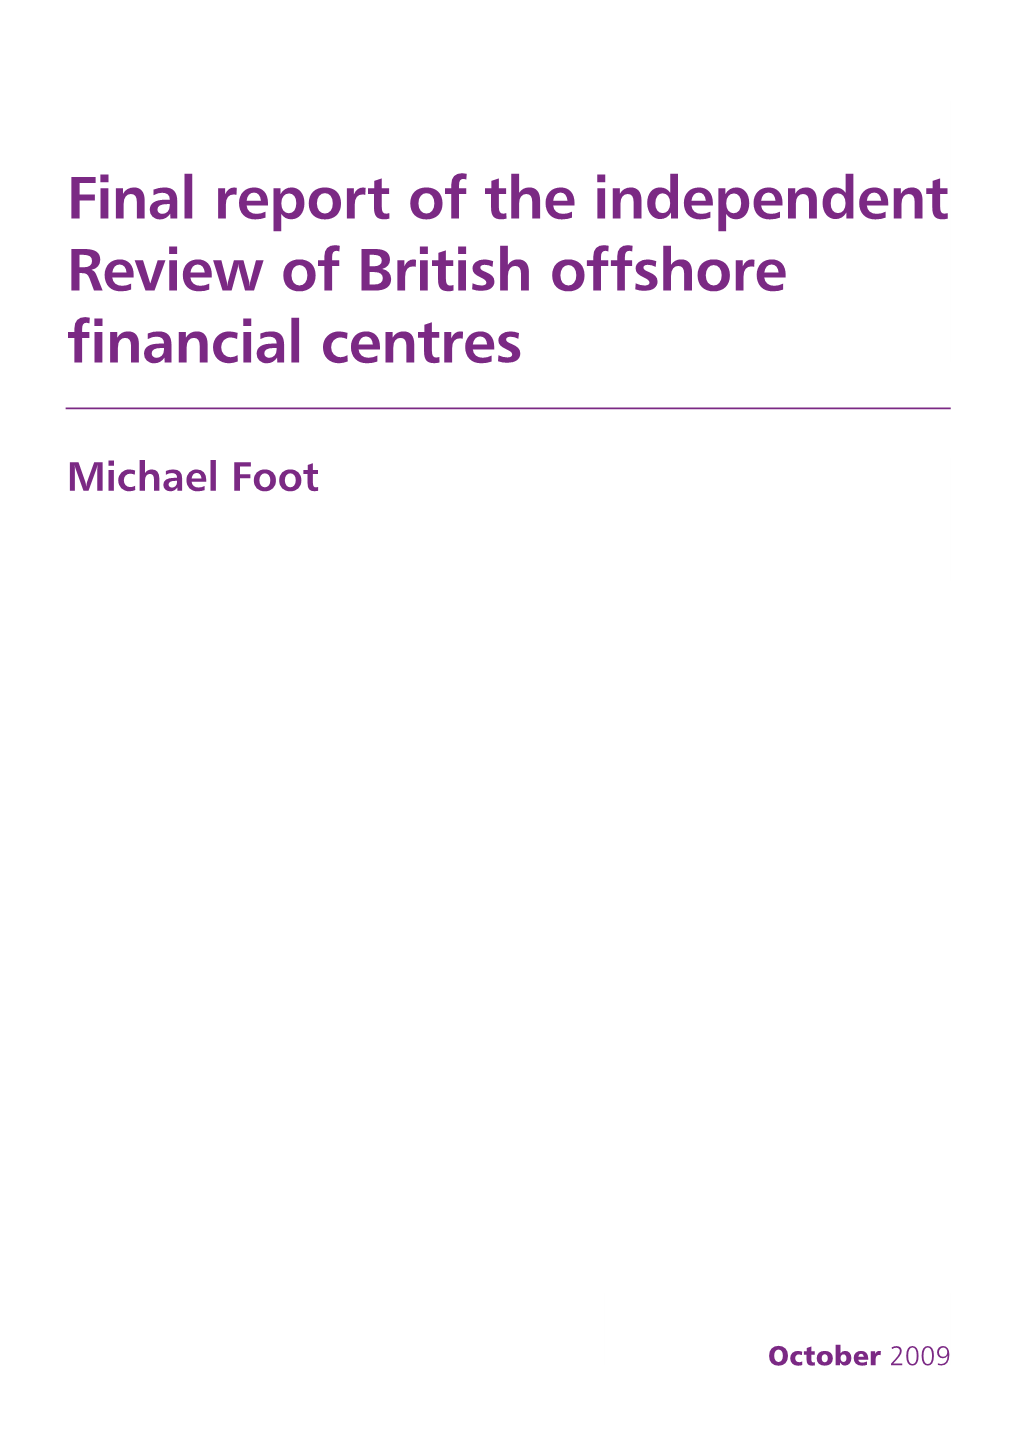 Final Report of the Independent Review of Offshore British Centres